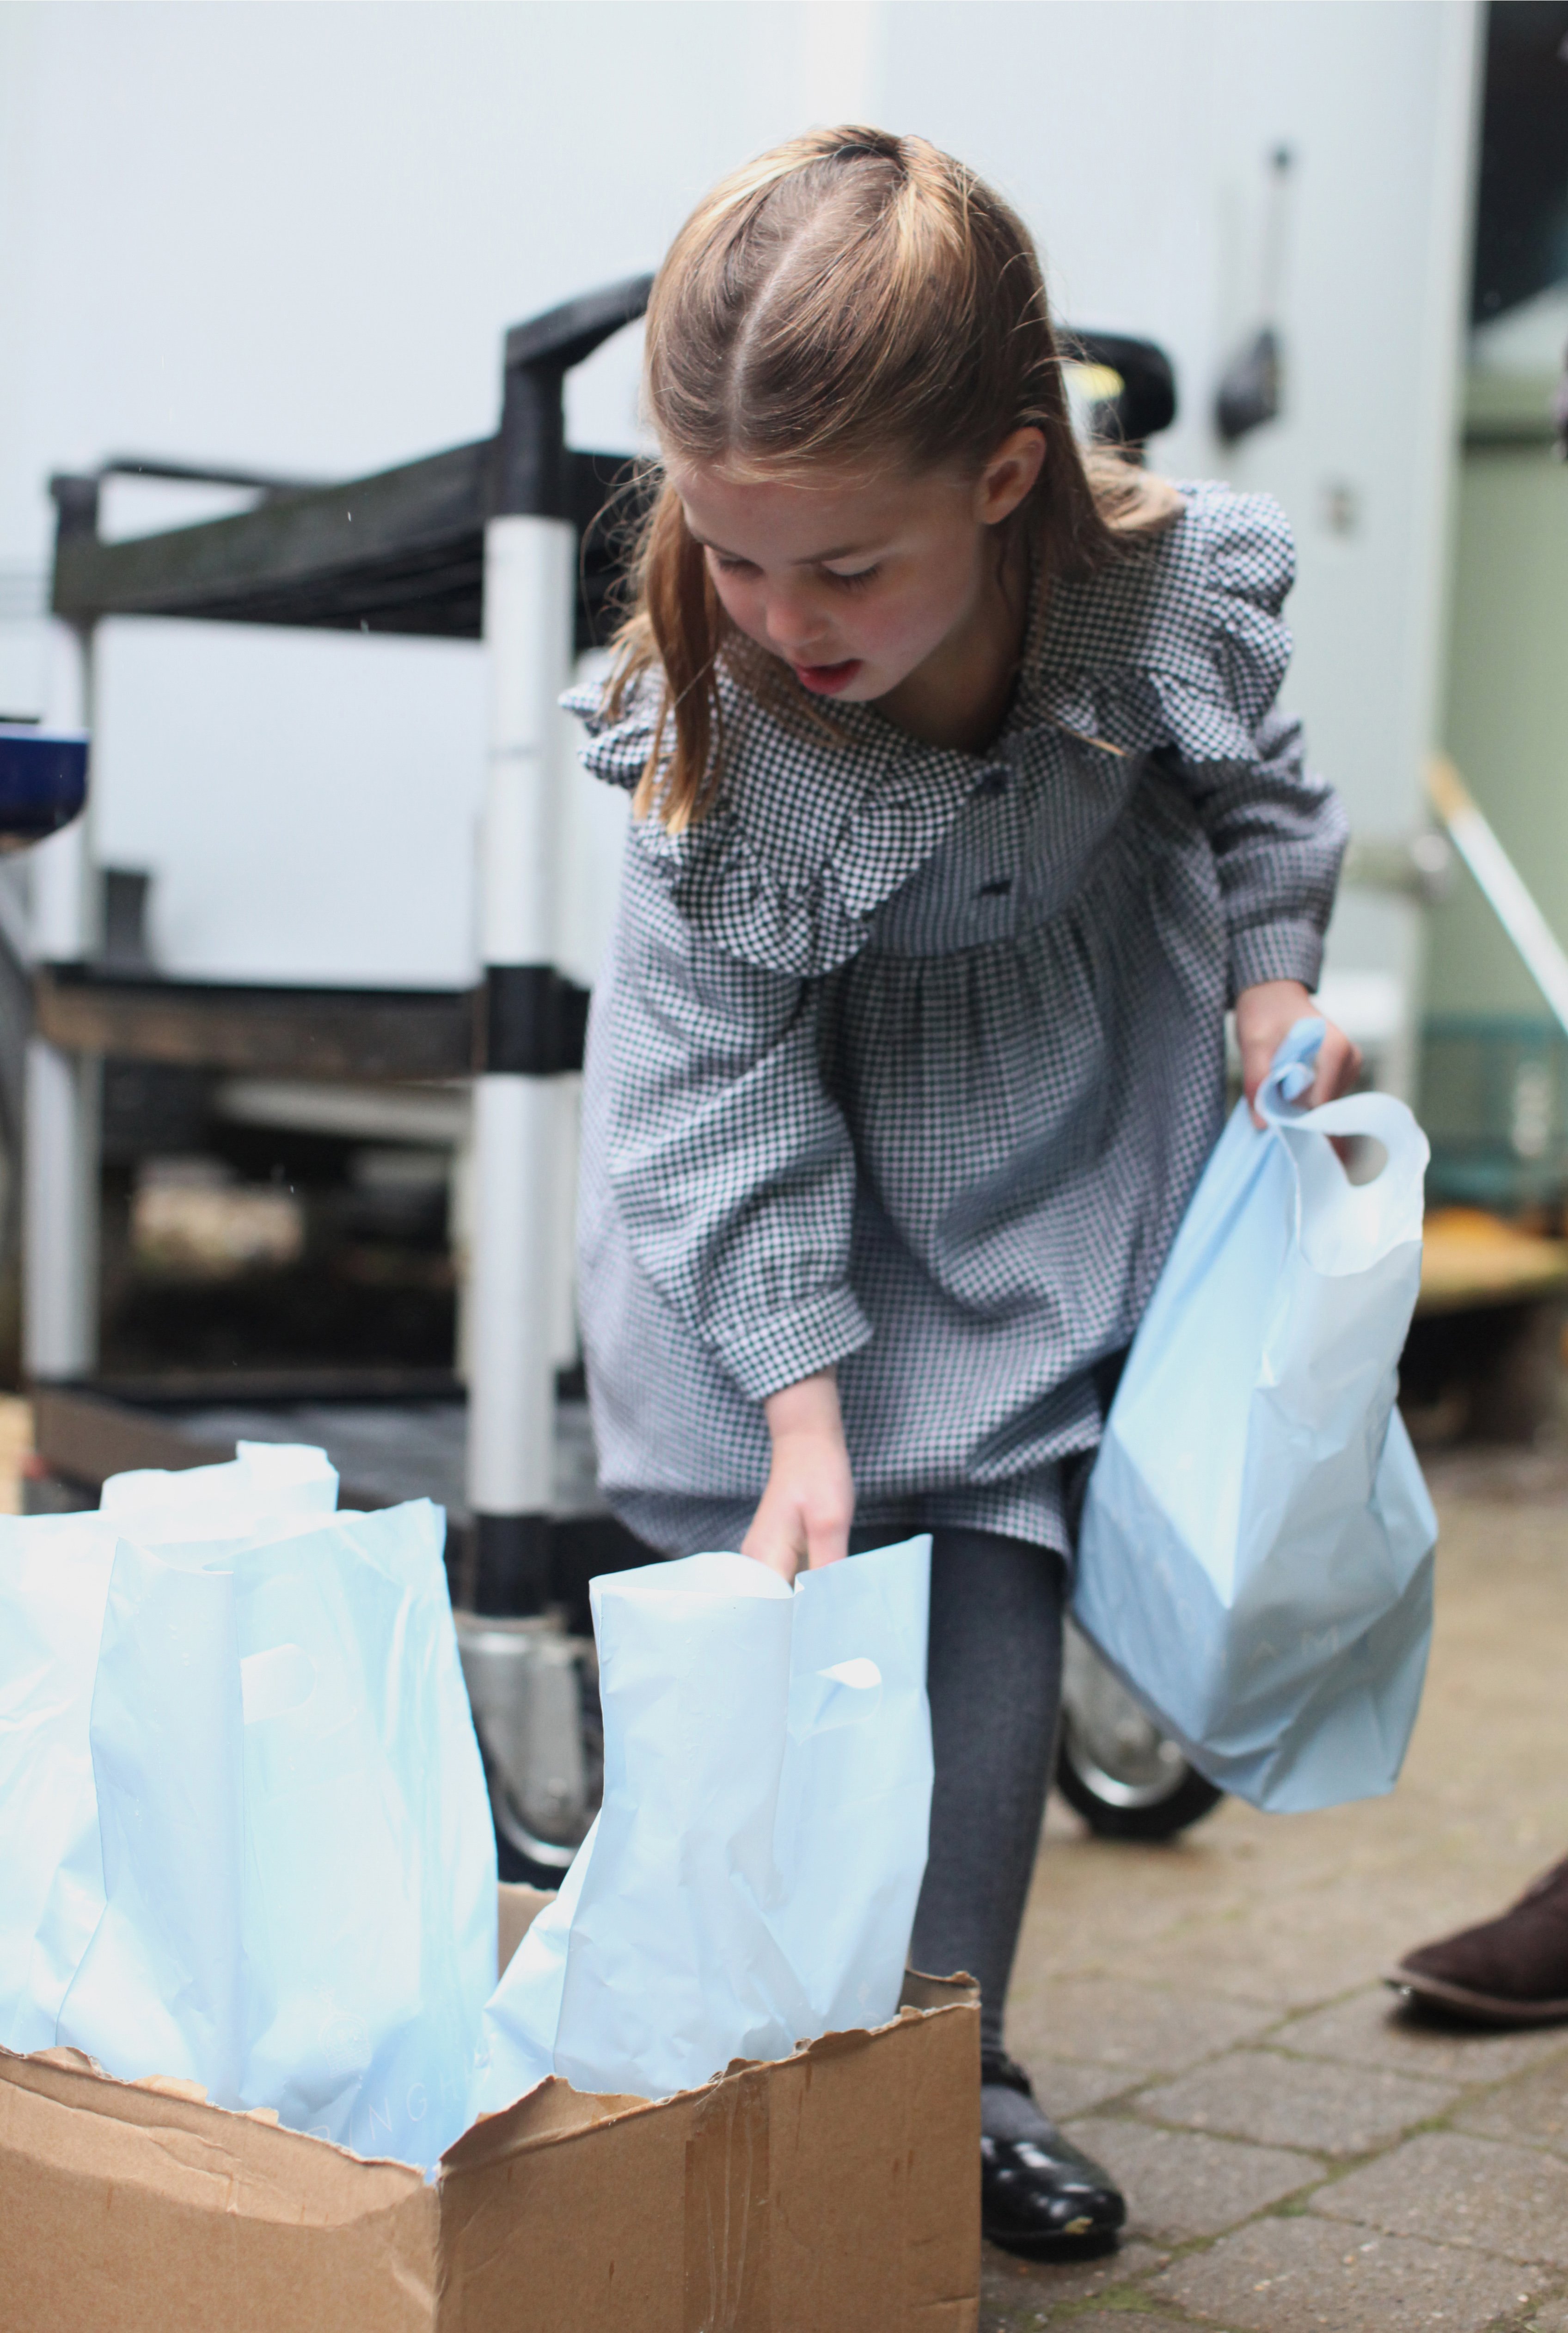 Princess Charlotte photographed picking up packages | Source: Getty Images